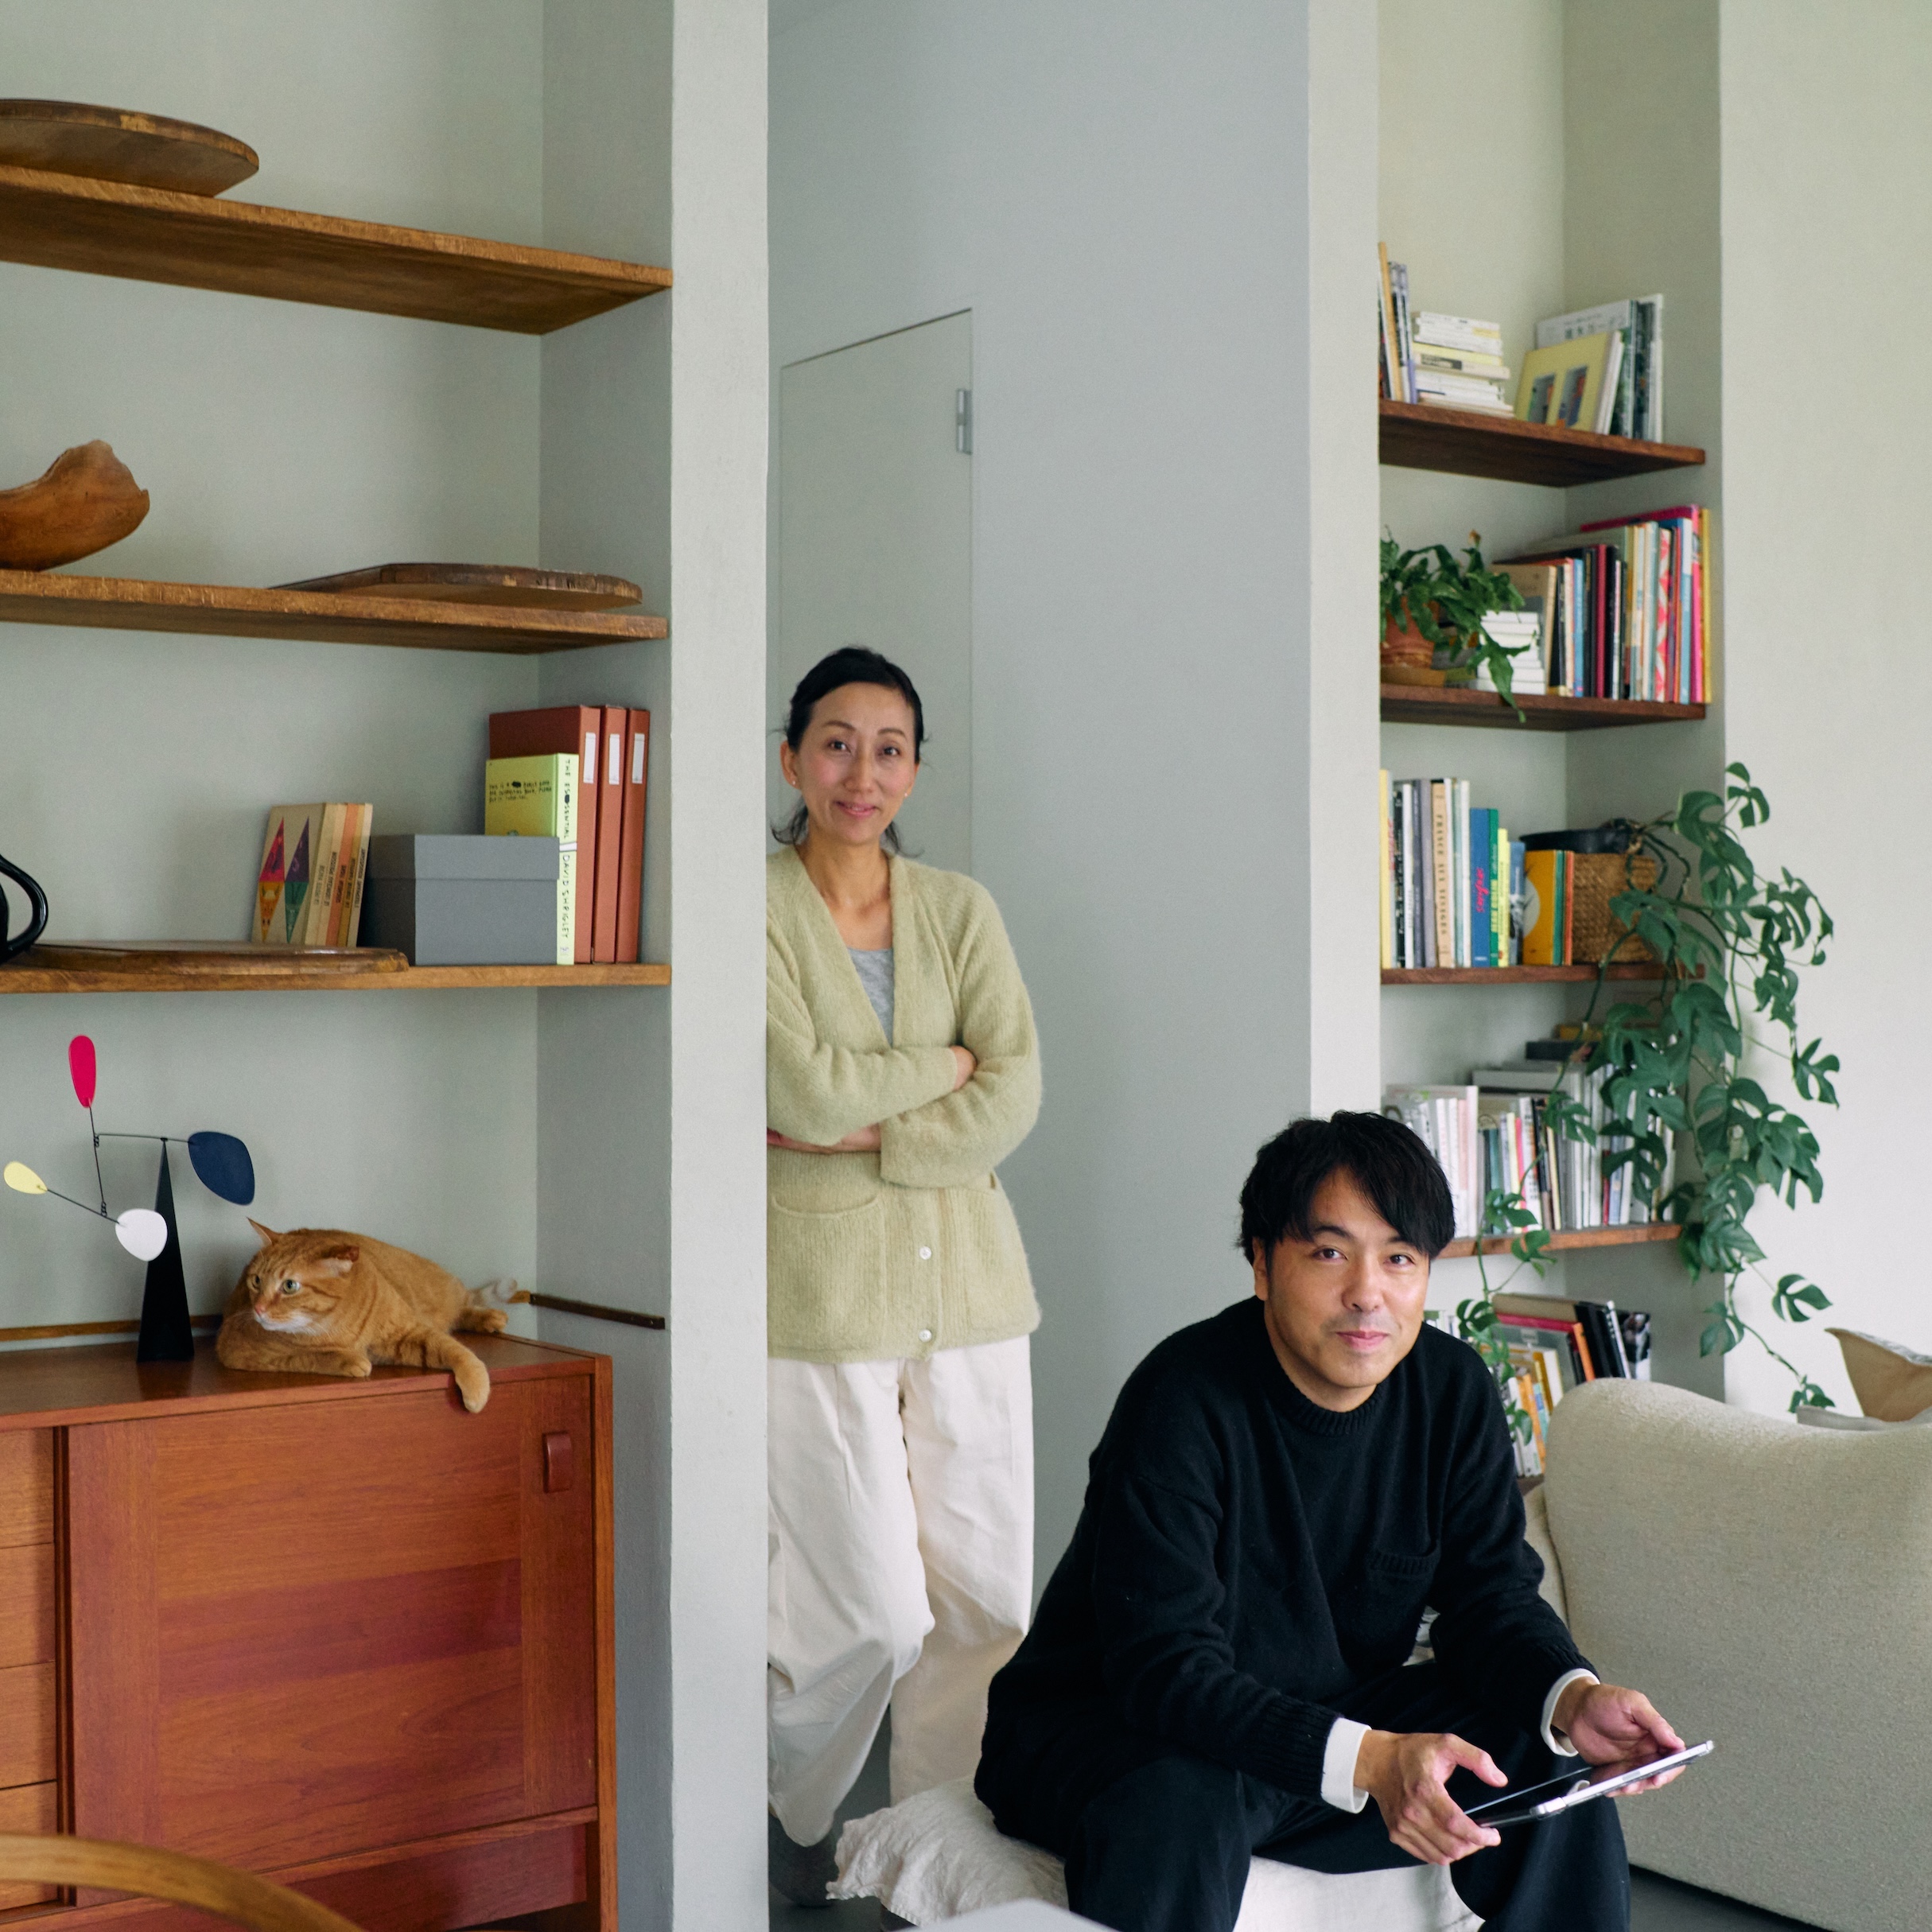 akira tani and kim hyunsook at home in the house they designed in tokyo. 320